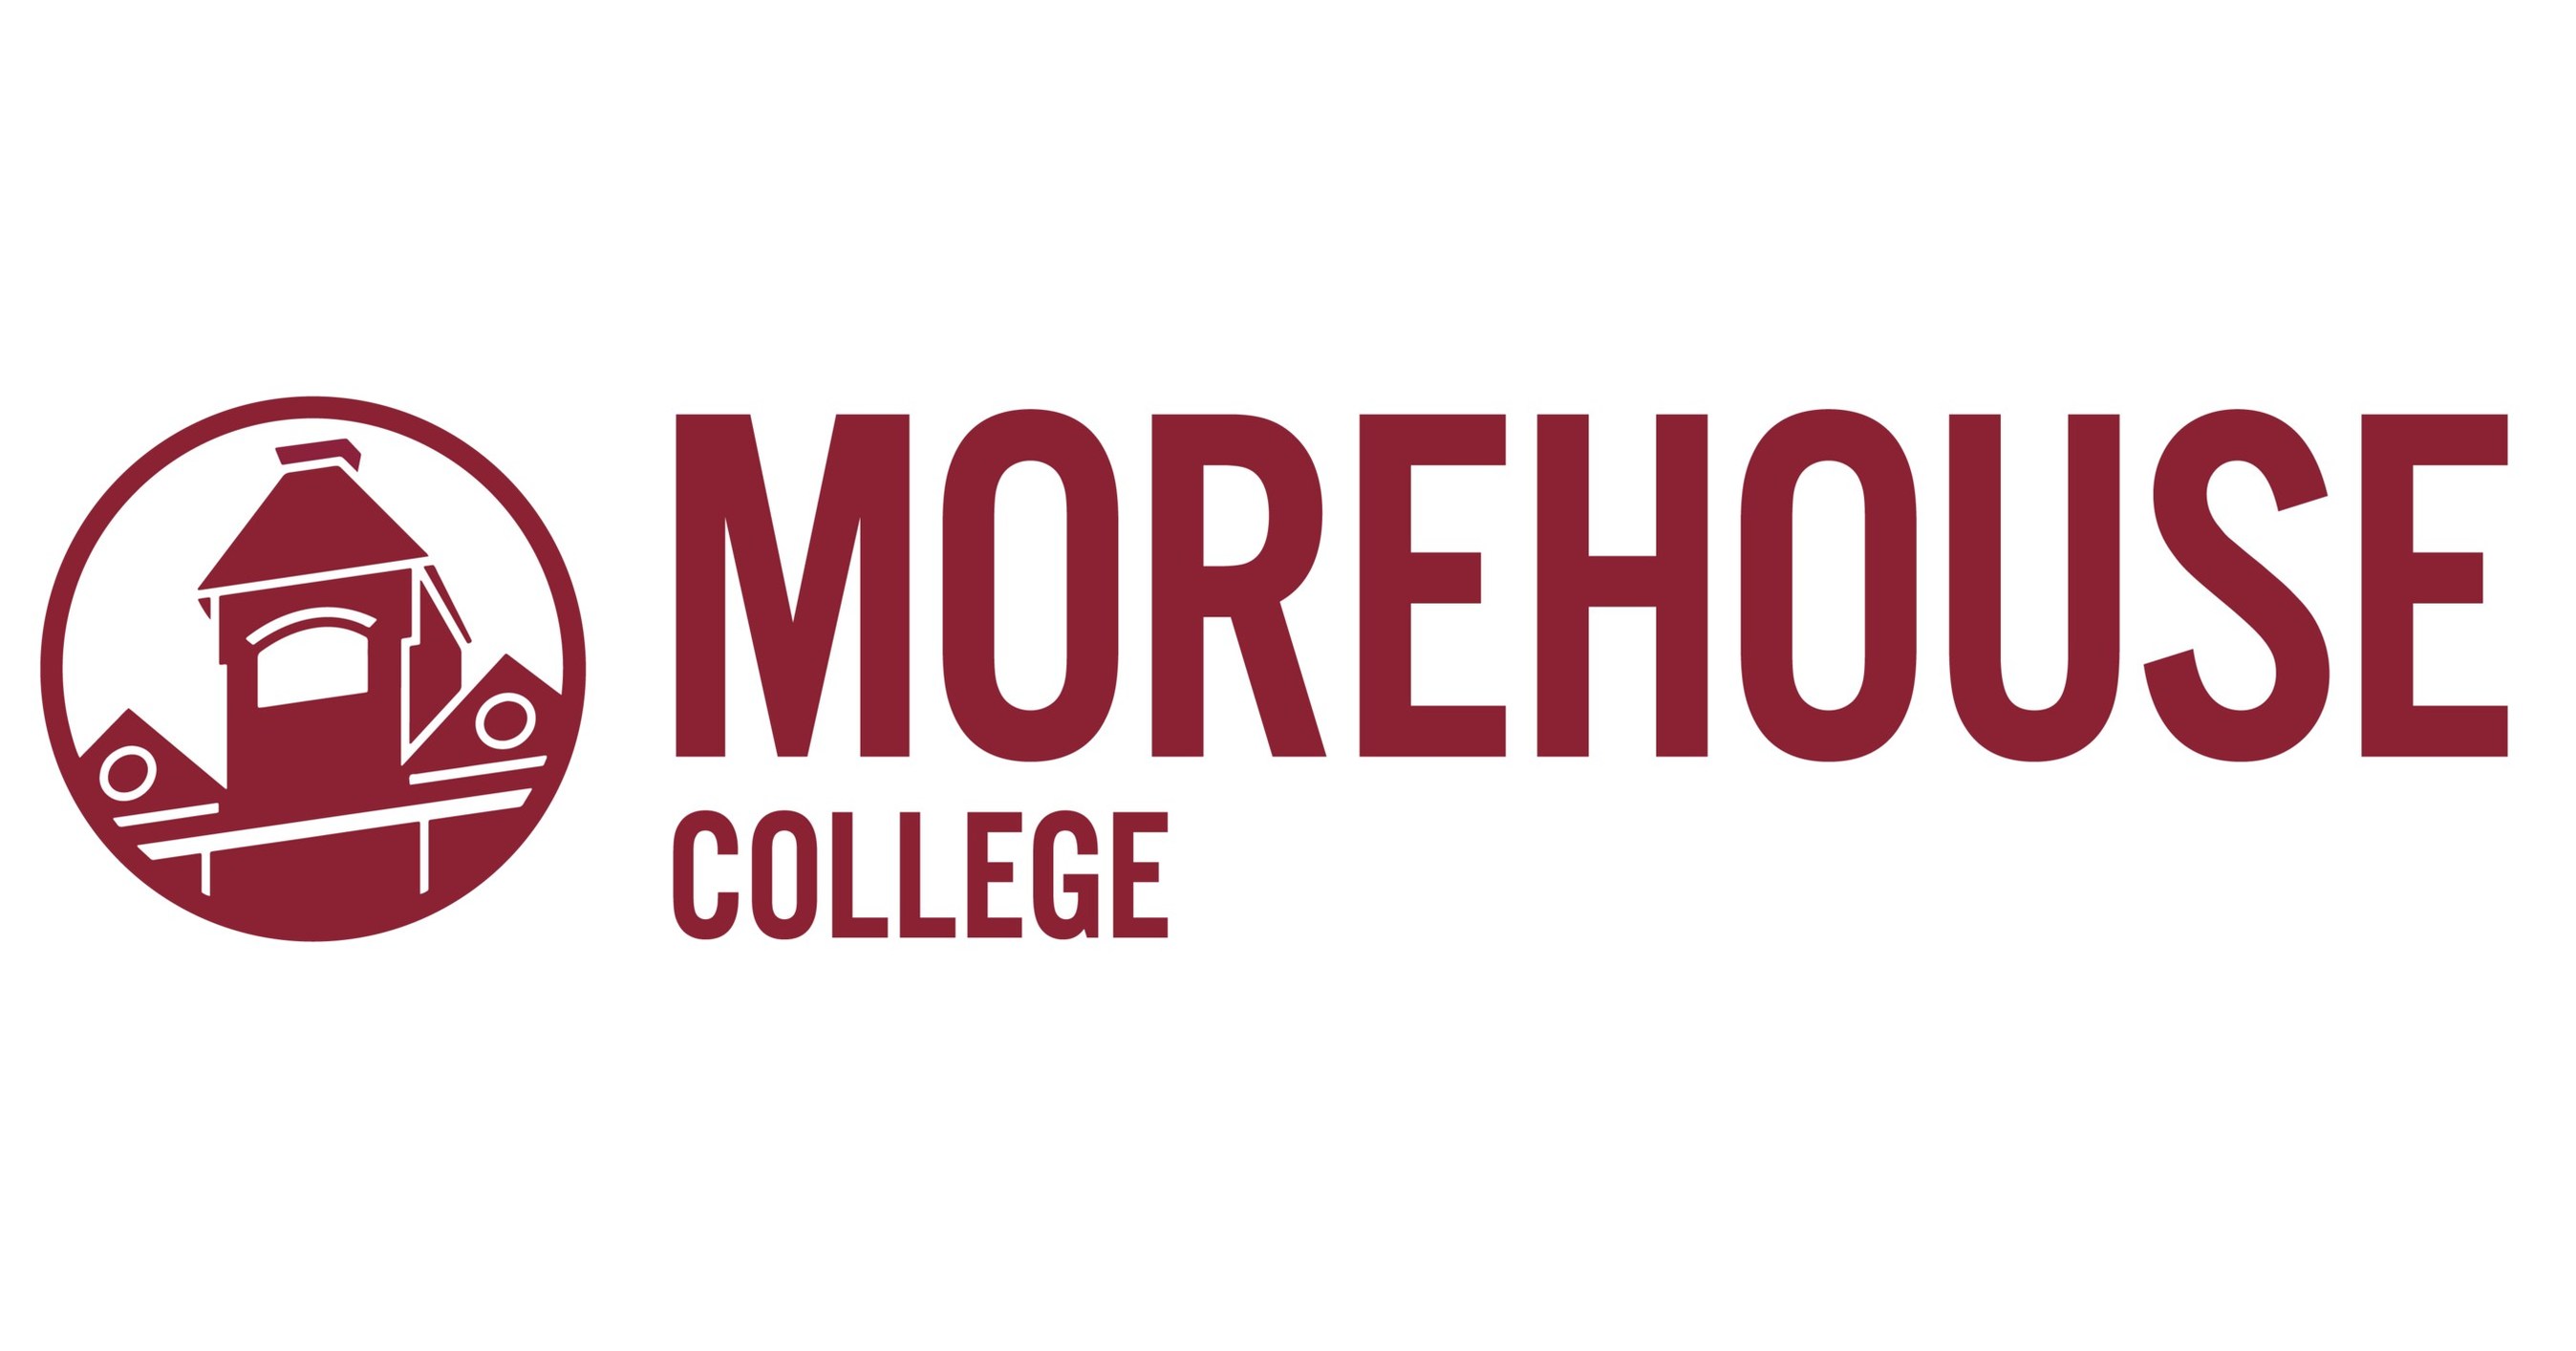 Morehouse College Announces Online Undergraduate Experience for Non-Traditional Students